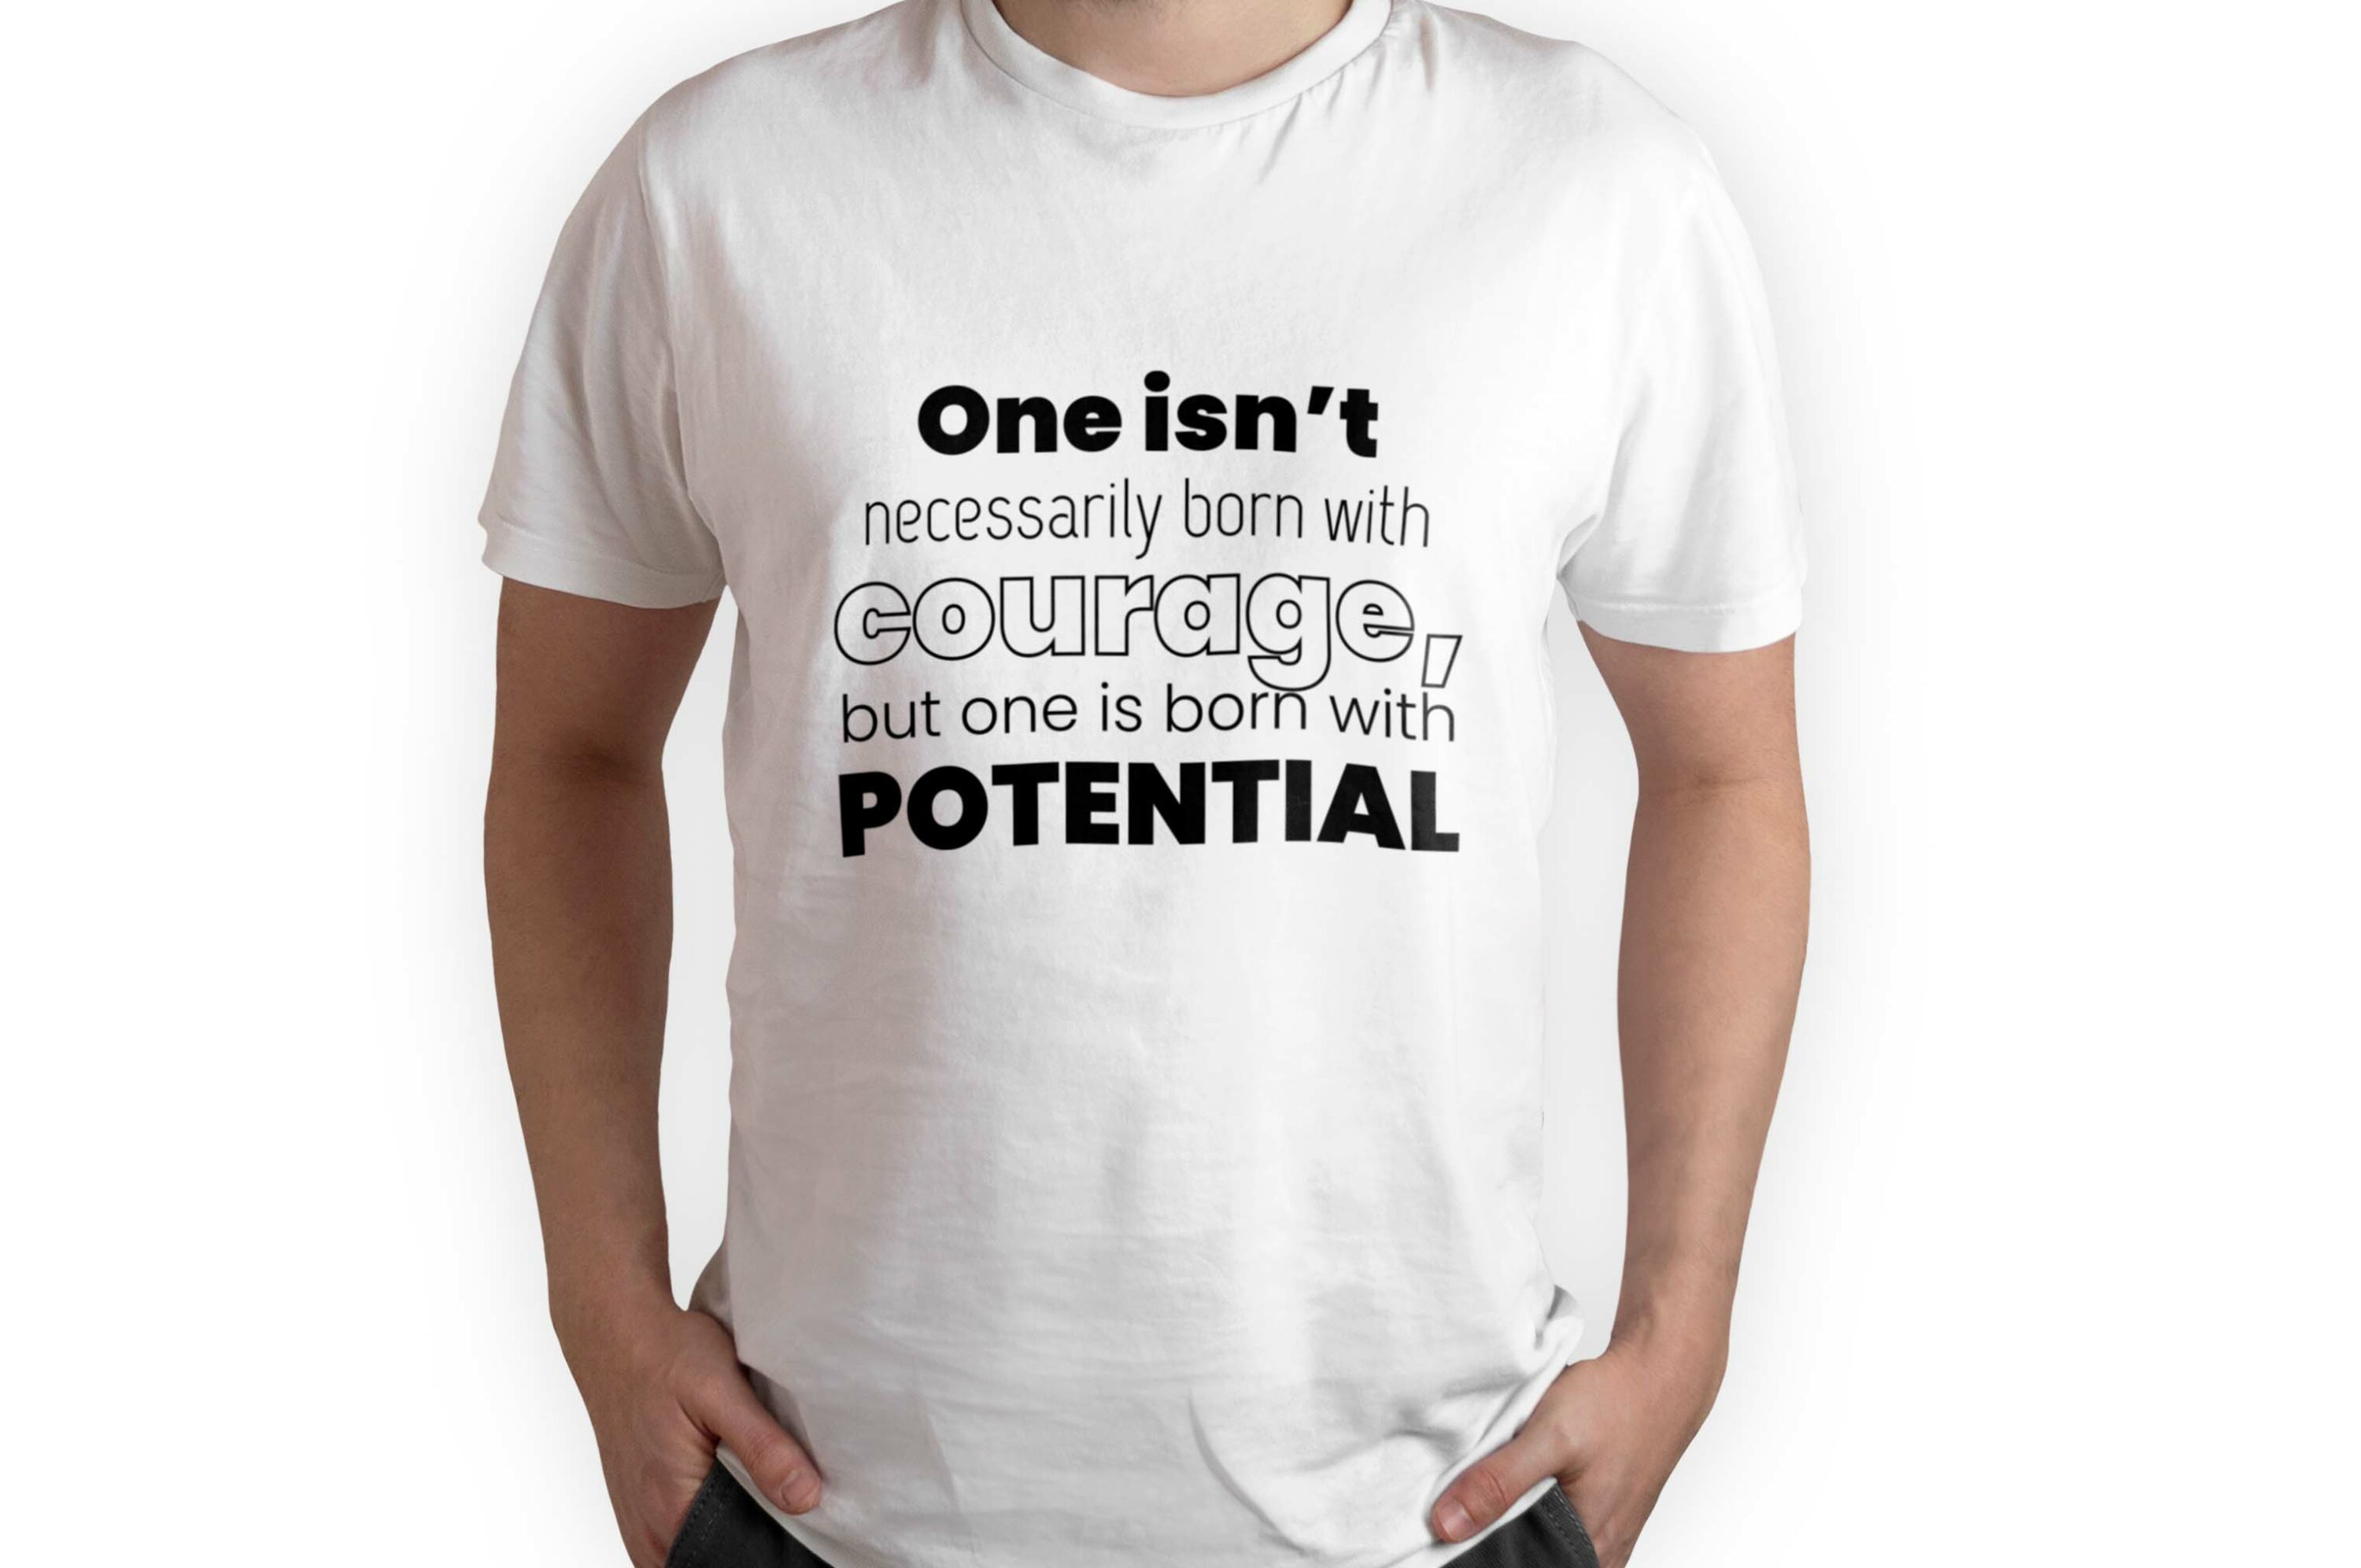 Bundle of 156 T-shirt Designs with Fitness Quotes, one isn't necessarily born with courage.